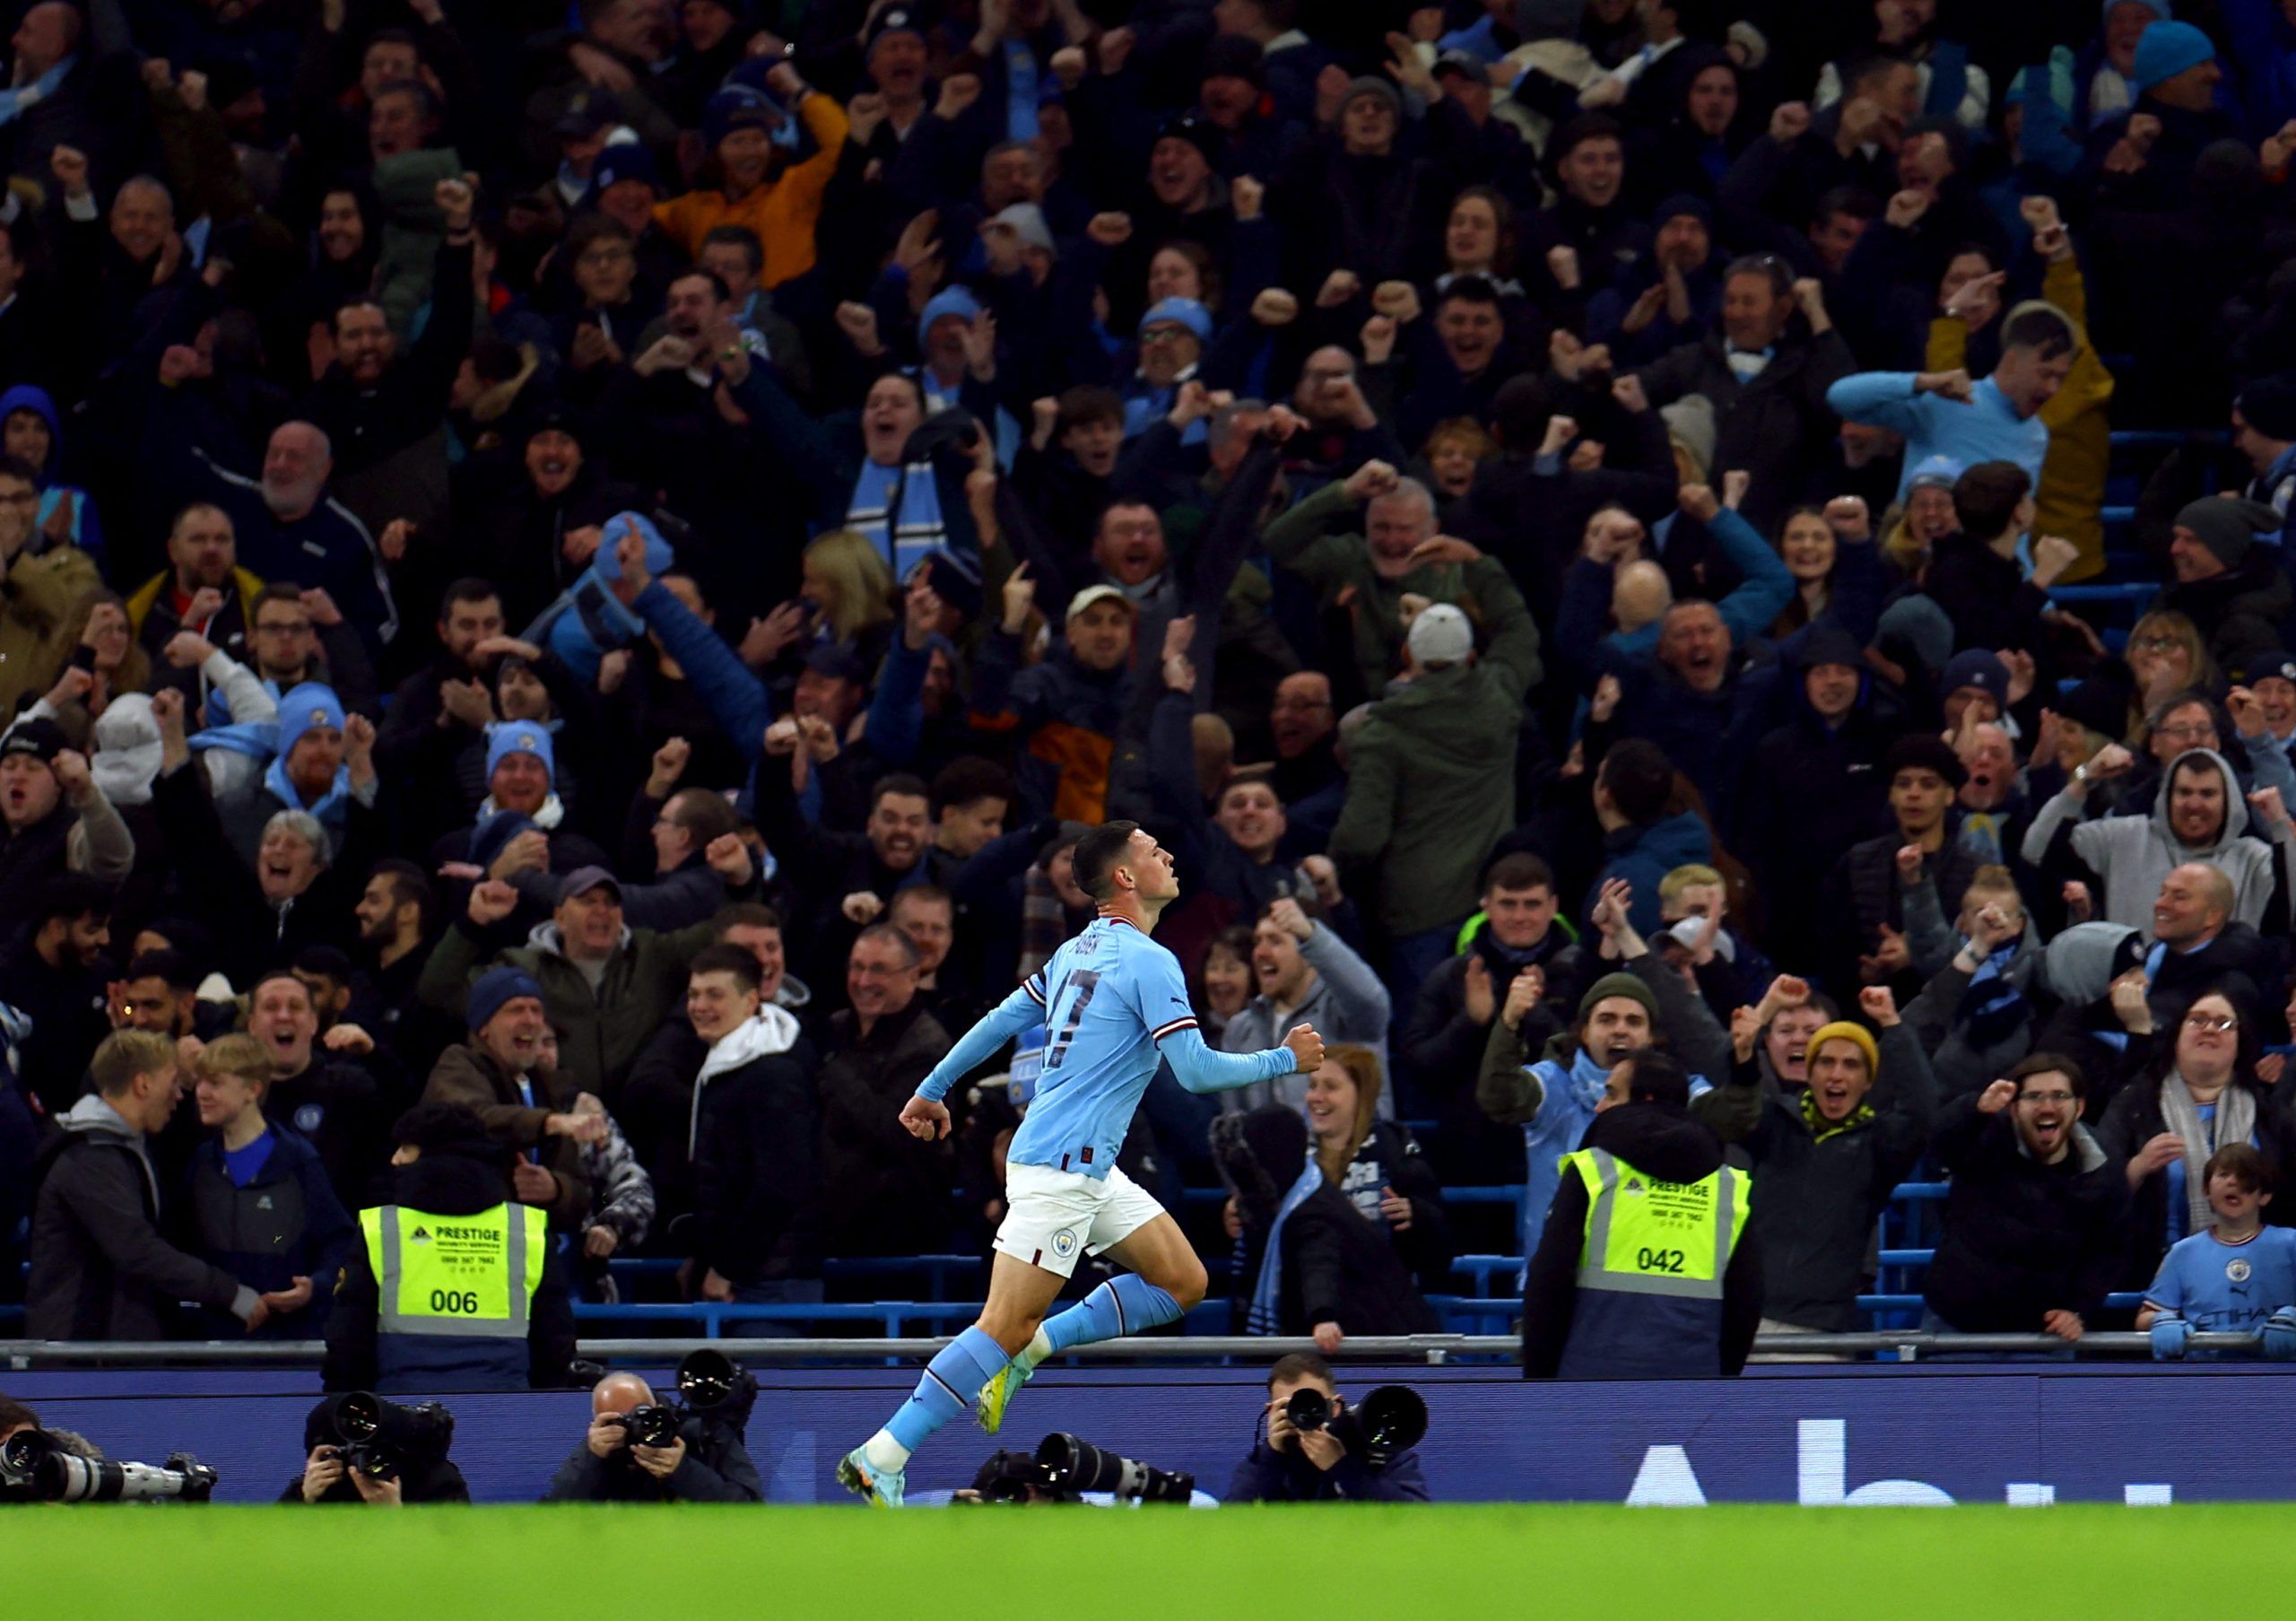 Soccer Football - FA Cup Third Round - Manchester City v Chelsea - Etihad Stadium, Manchester, Britain - January 8, 2023 Manchester City's Phil Foden celebrates scoring their third goal REUTERS/Molly Darlington